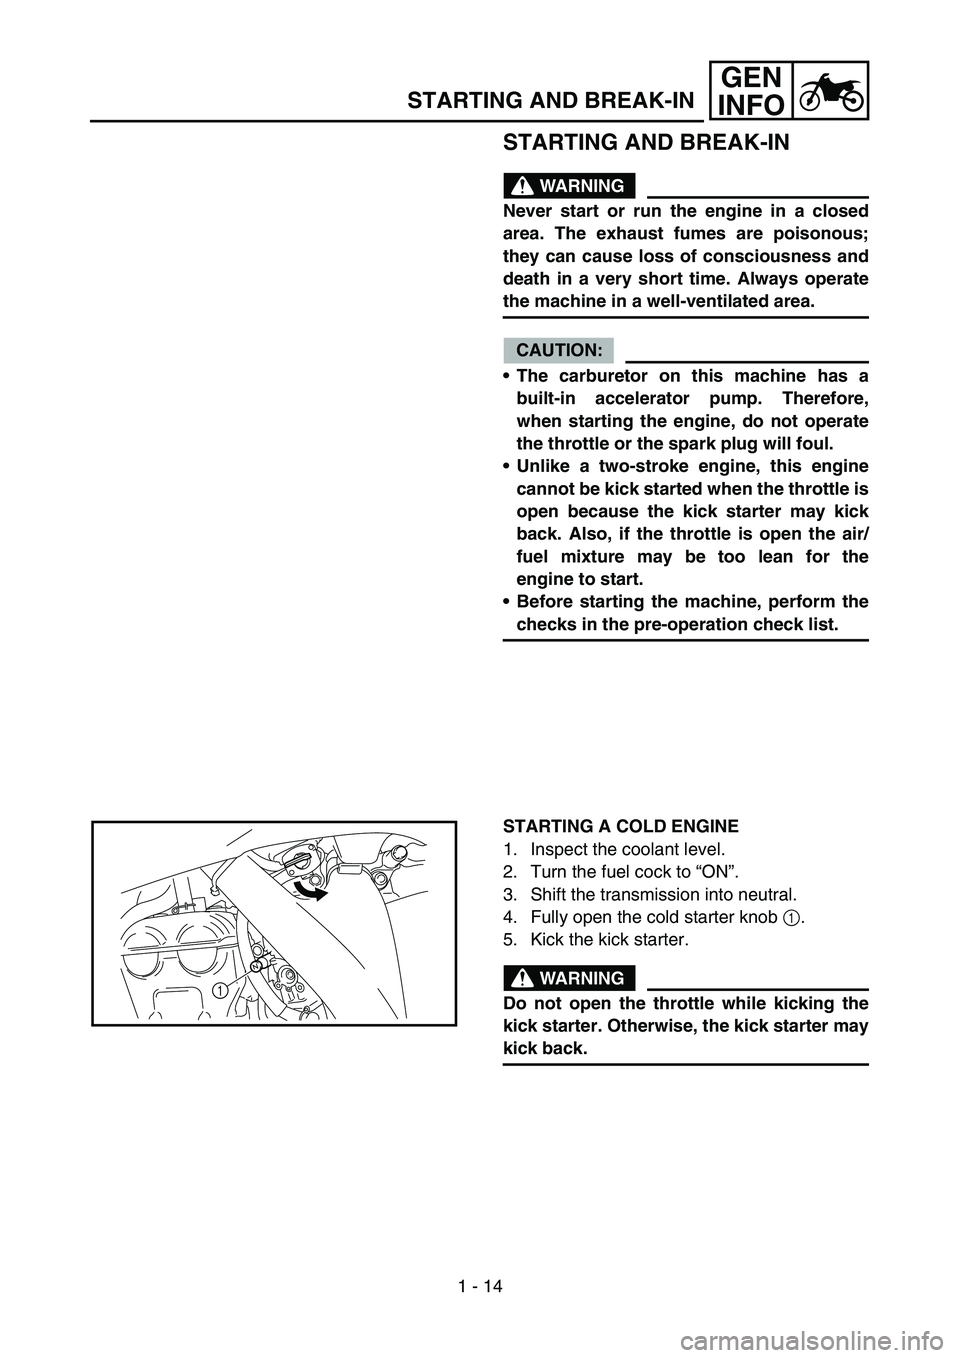 YAMAHA YZ450F 2006  Owners Manual 1 - 14
GEN
INFO
STARTING AND BREAK-IN
STARTING AND BREAK-IN
WARNING
Never start or run the engine in a closed
area. The exhaust fumes are poisonous;
they can cause loss of consciousness and
death in a